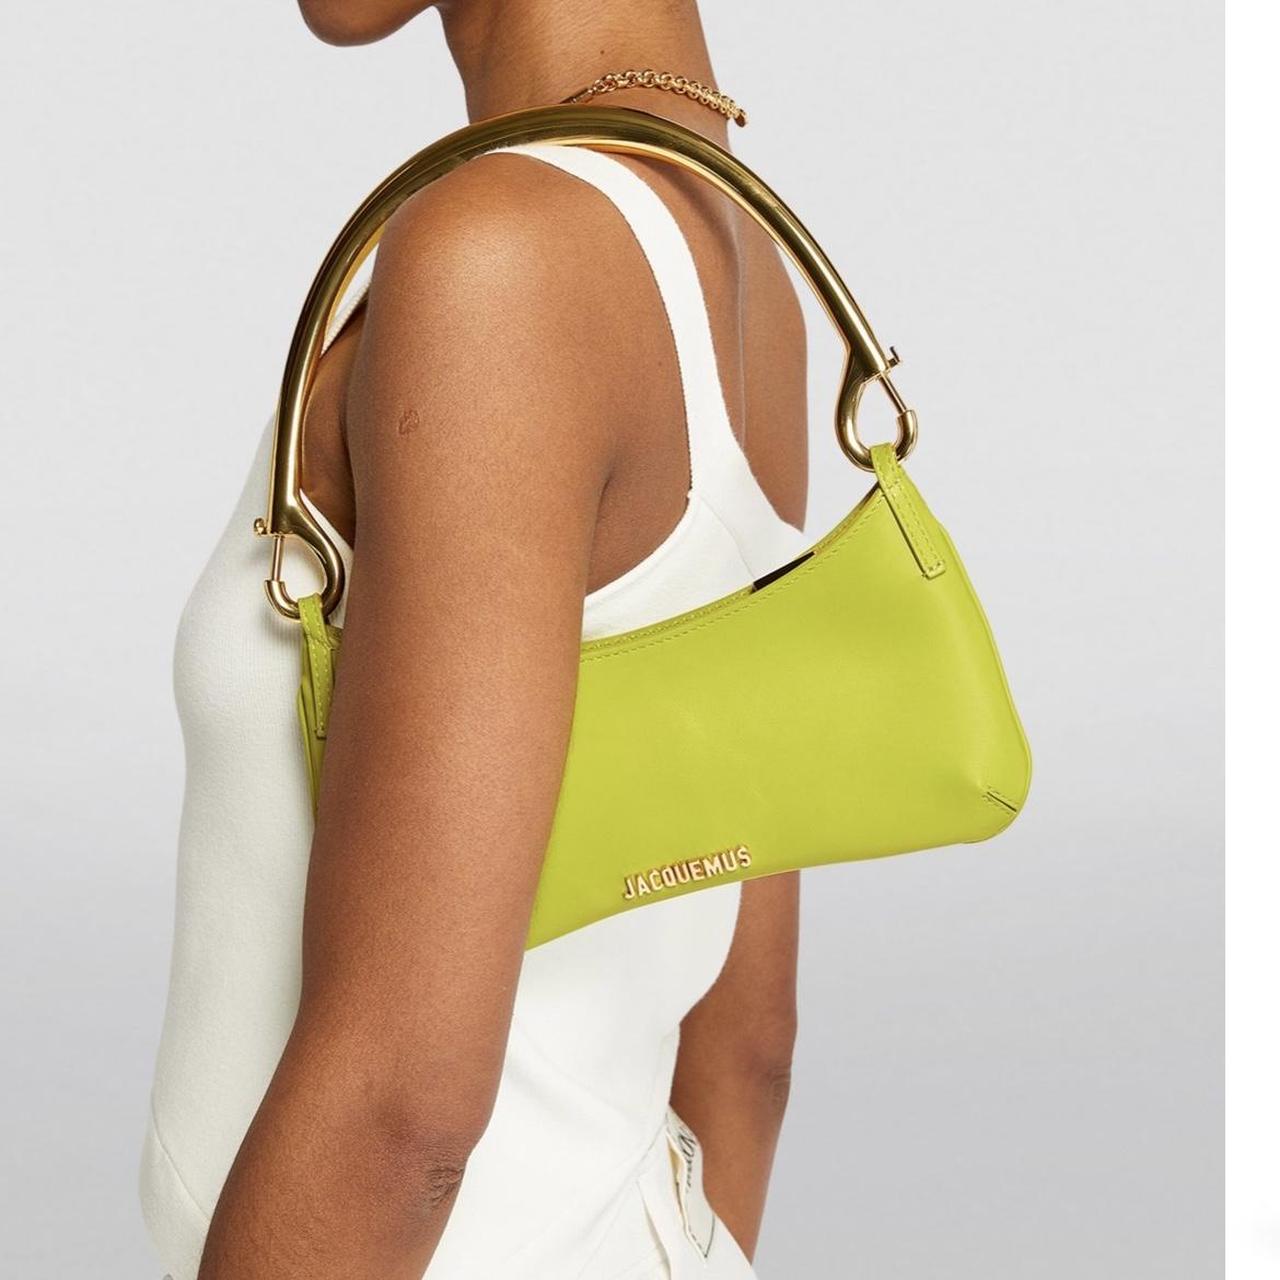 Jacquemus Women's Green and Gold Bag (2)